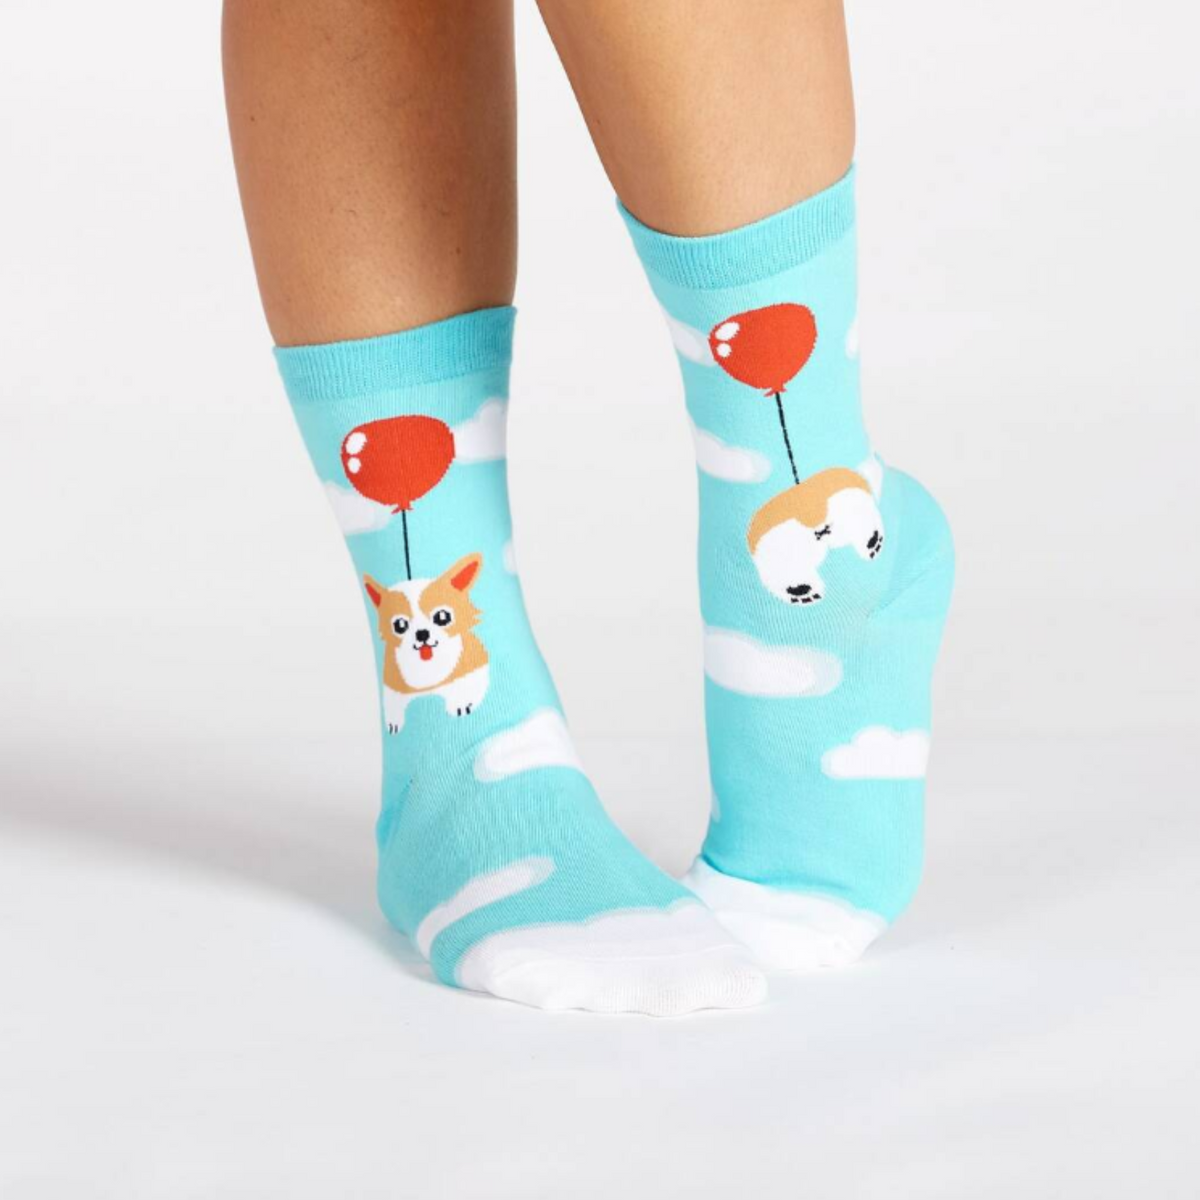 Sock It To Me Pup, Pup and Away women&#39;s crew socks featuring light blue socks with clouds all over and a Corgi dog floating by a red balloon, socks show front and back of Corgi dog. Socks worn by model seen from side.